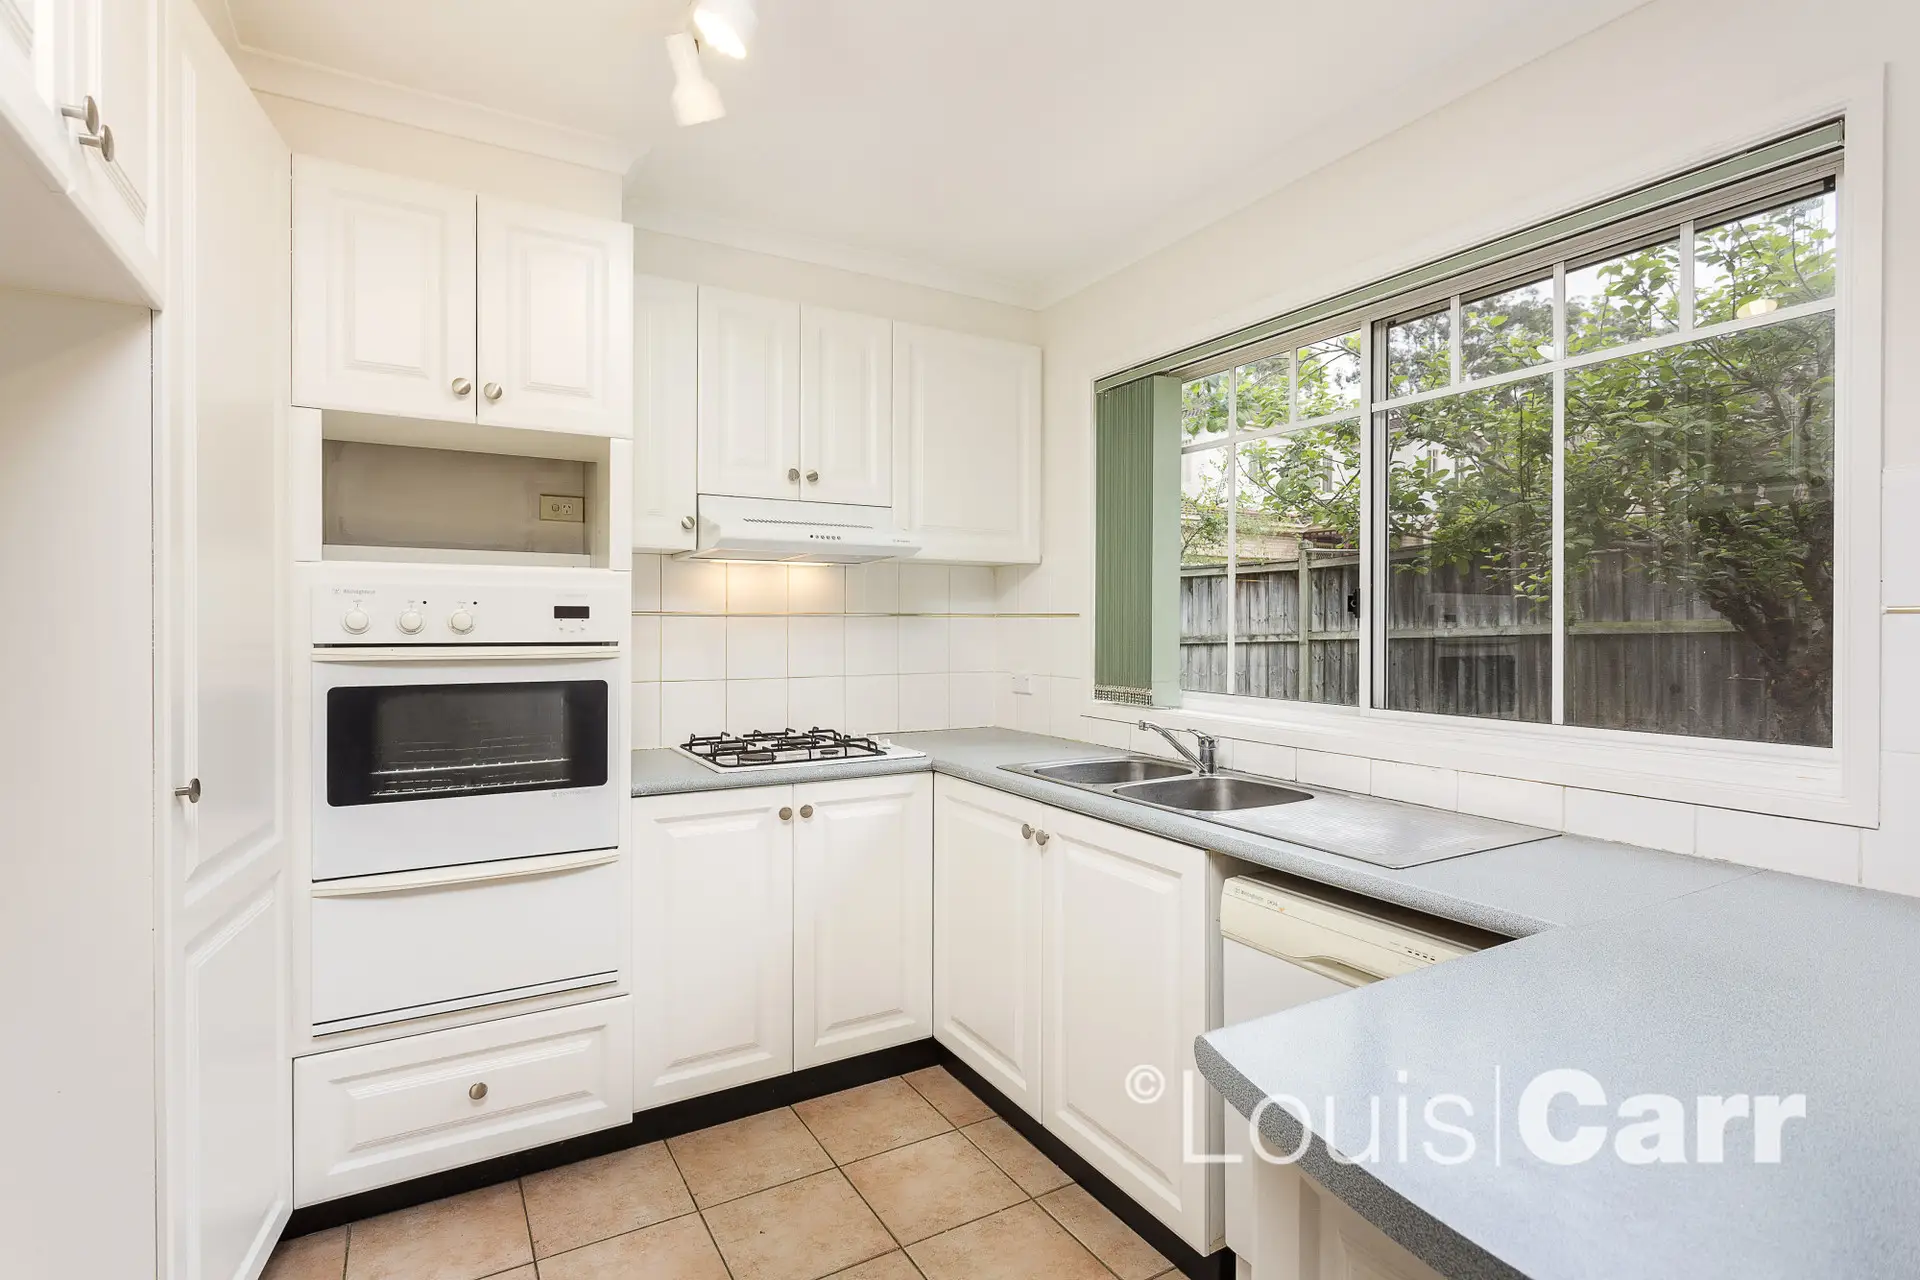 11 Tennyson Close, Cherrybrook Leased by Louis Carr Real Estate - image 2